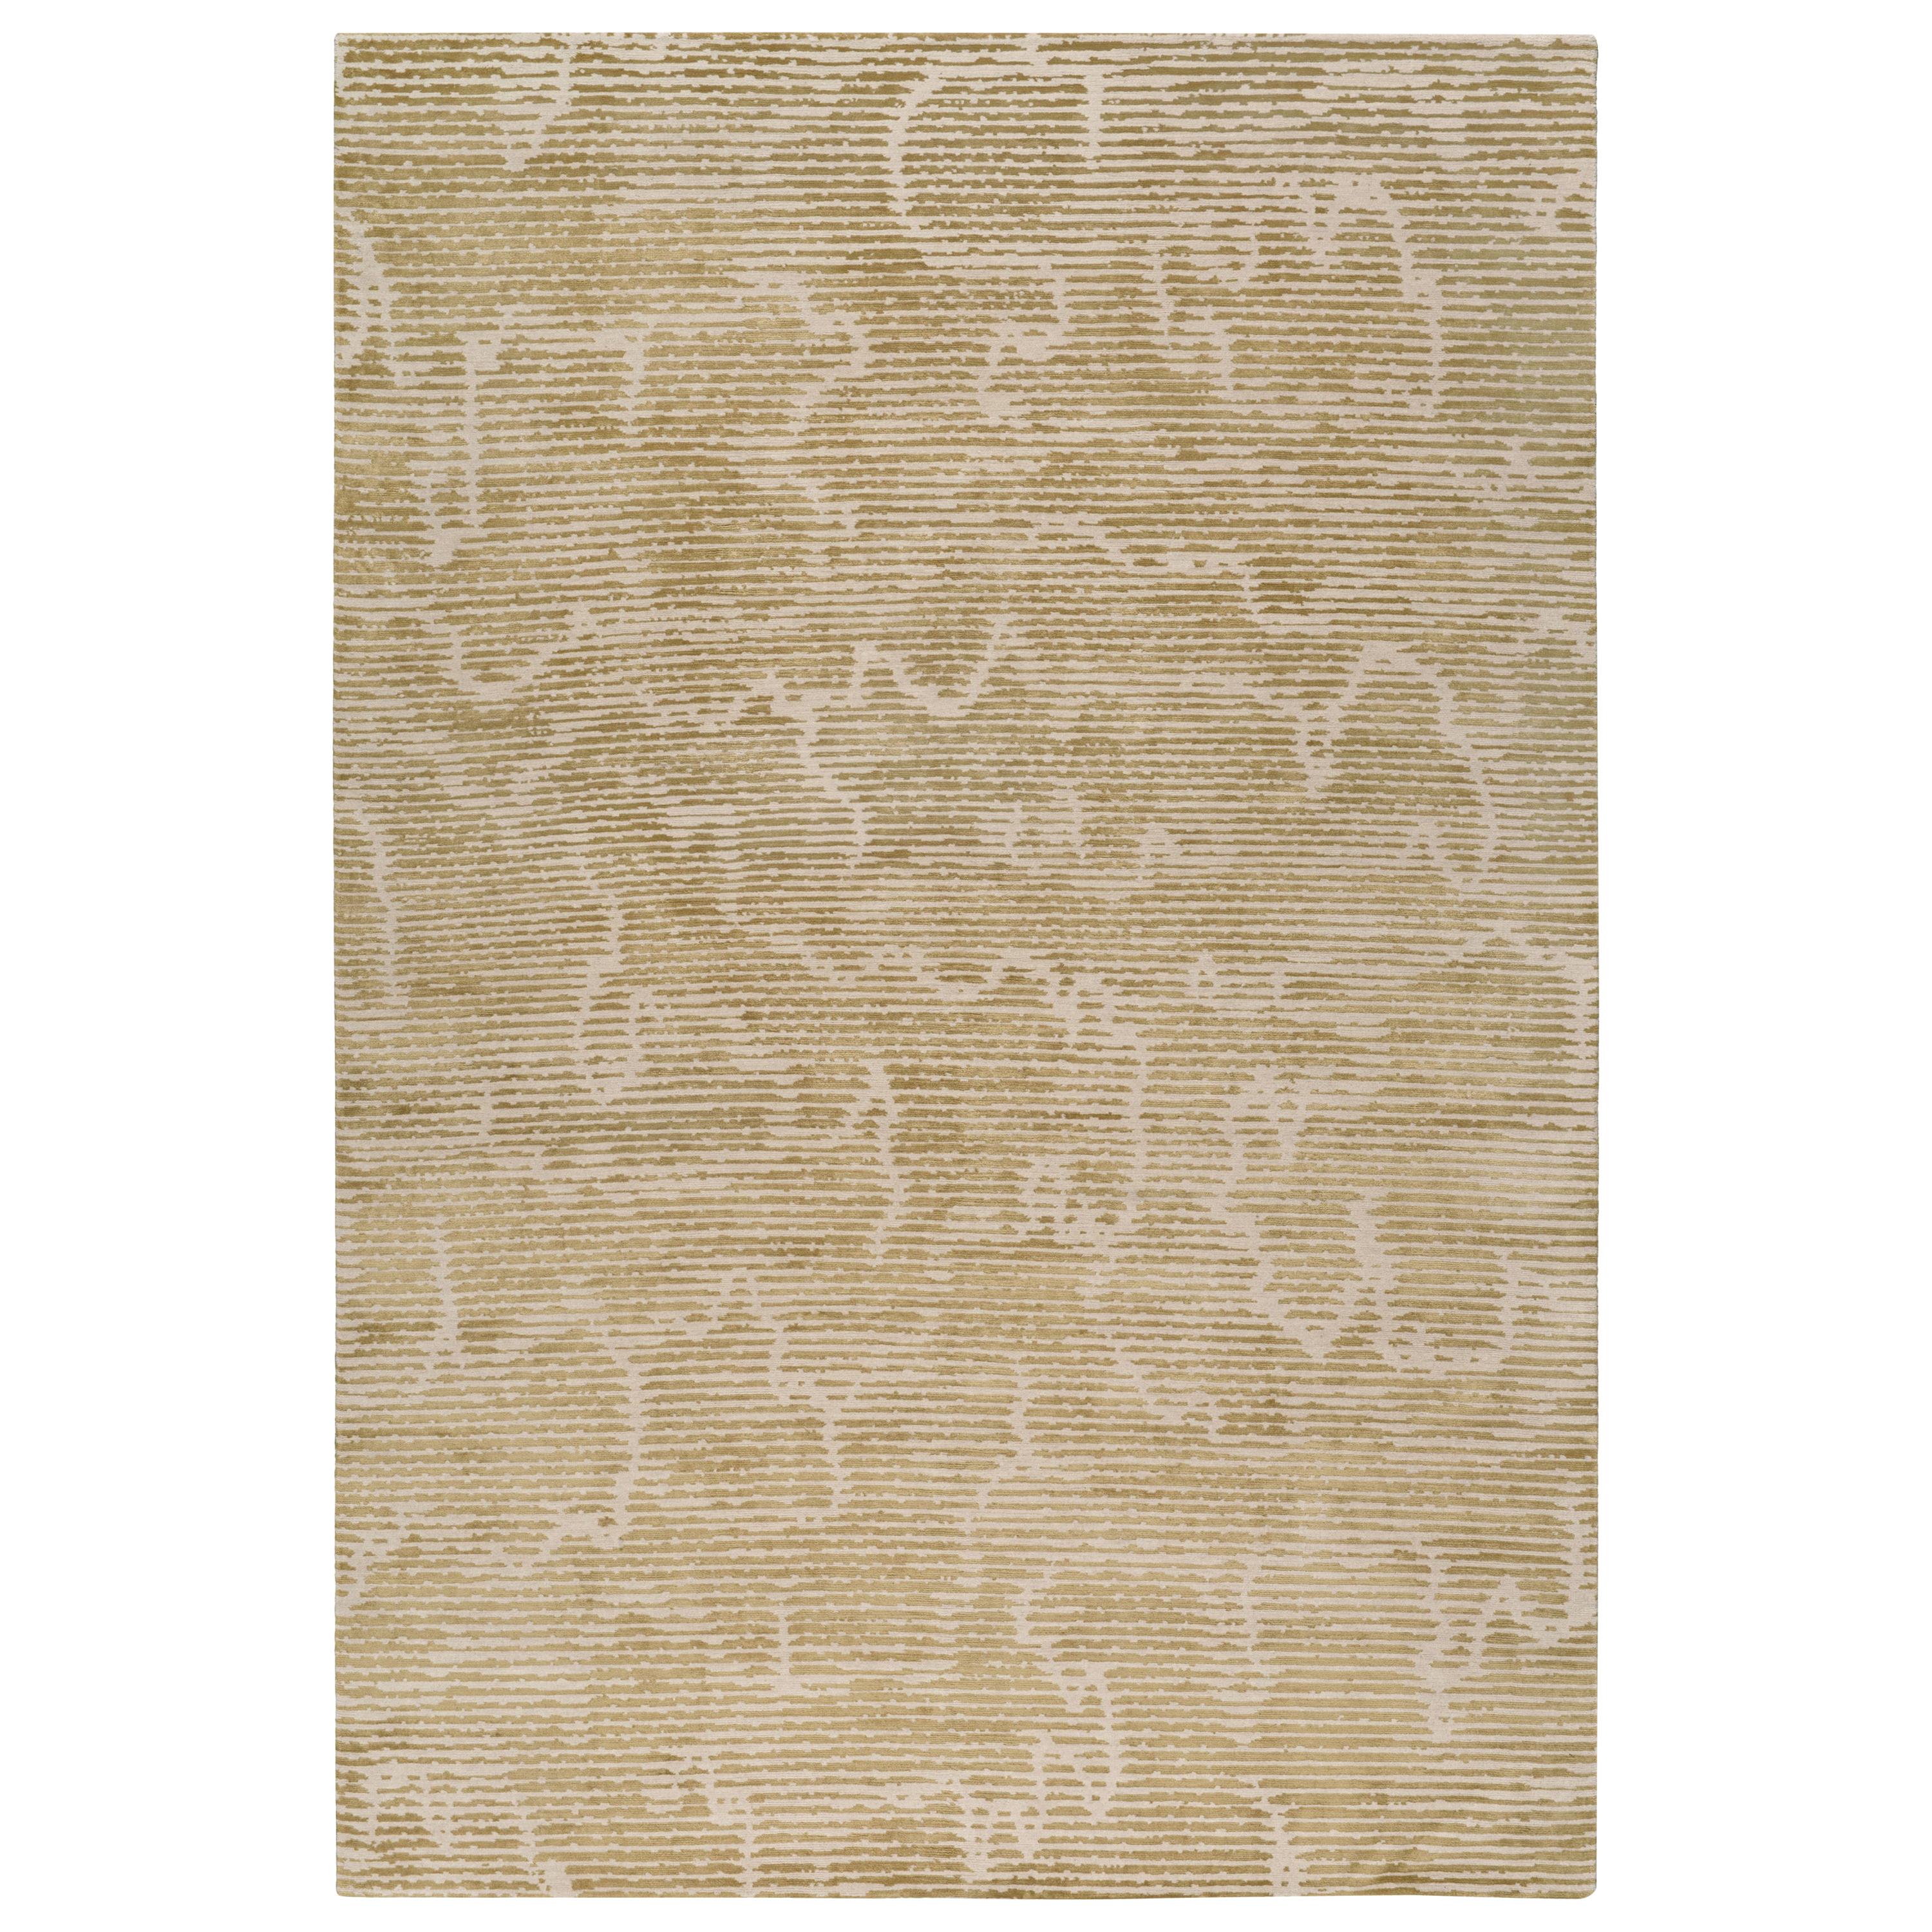 Staccato Hand-Knotted 12x9 Rug in Wool and Silk by Kelly Wearstler